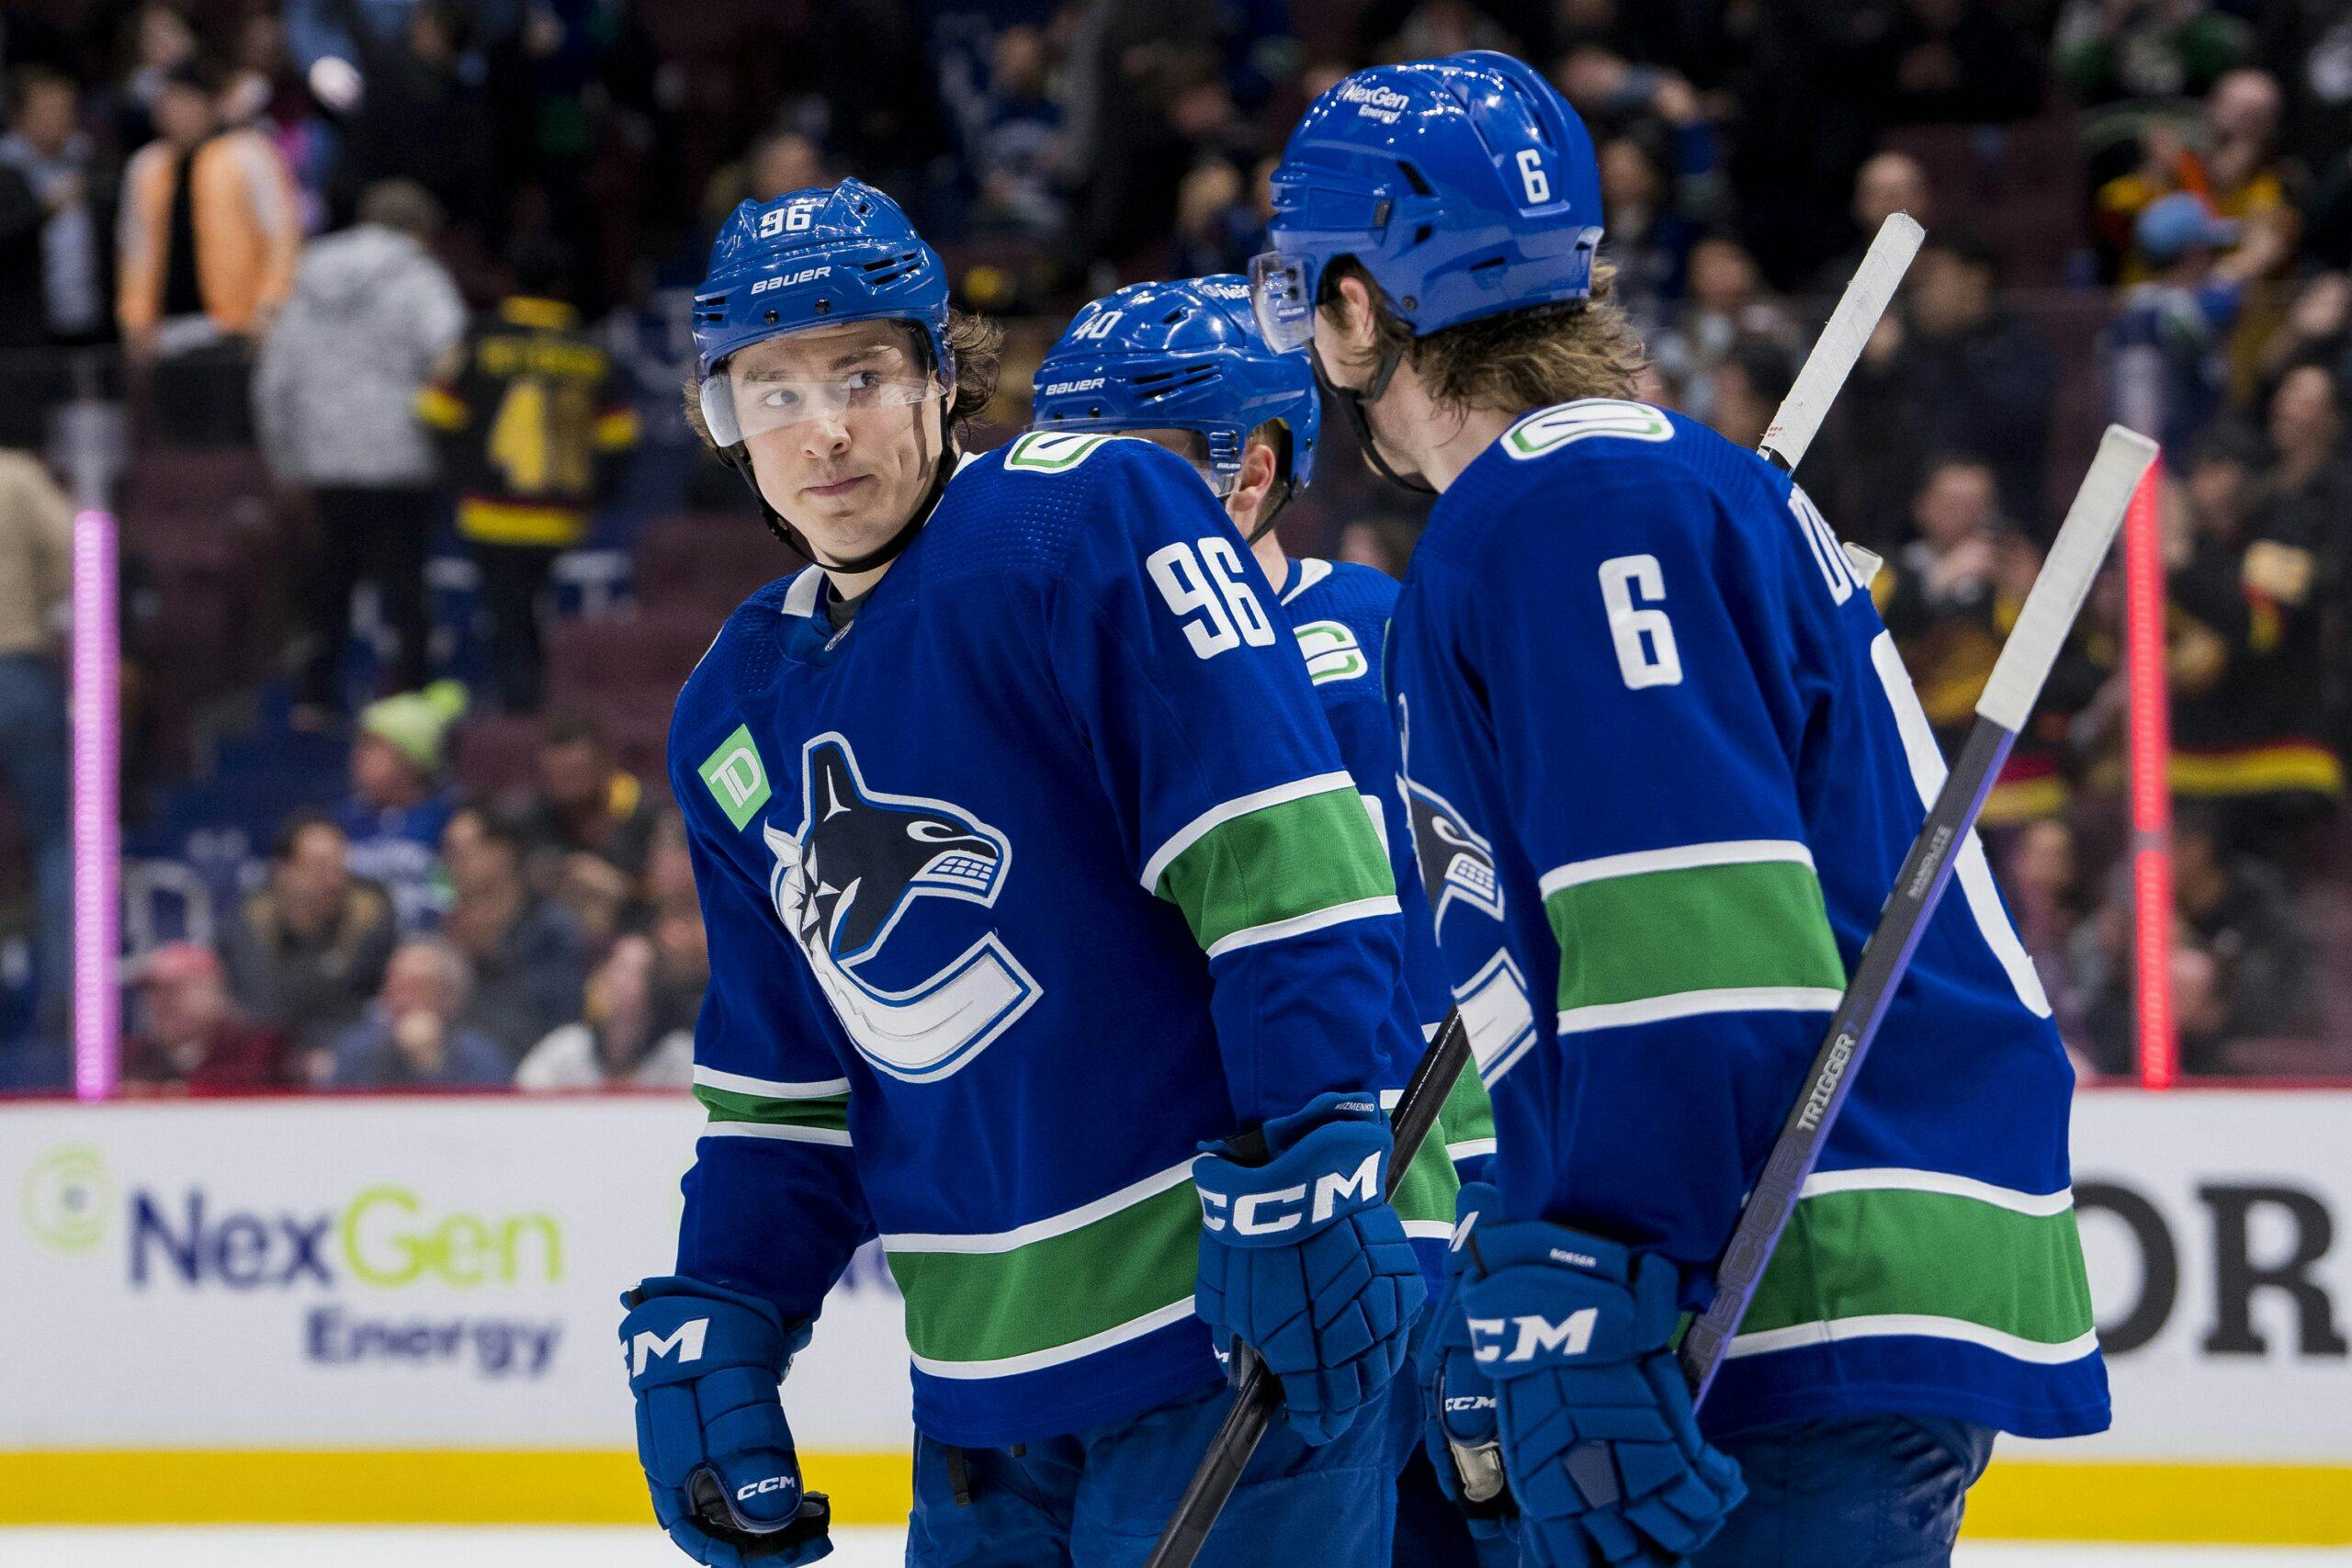 Get Excited for the Vancouver Canucks' 2023/24 NHL Season - Inside